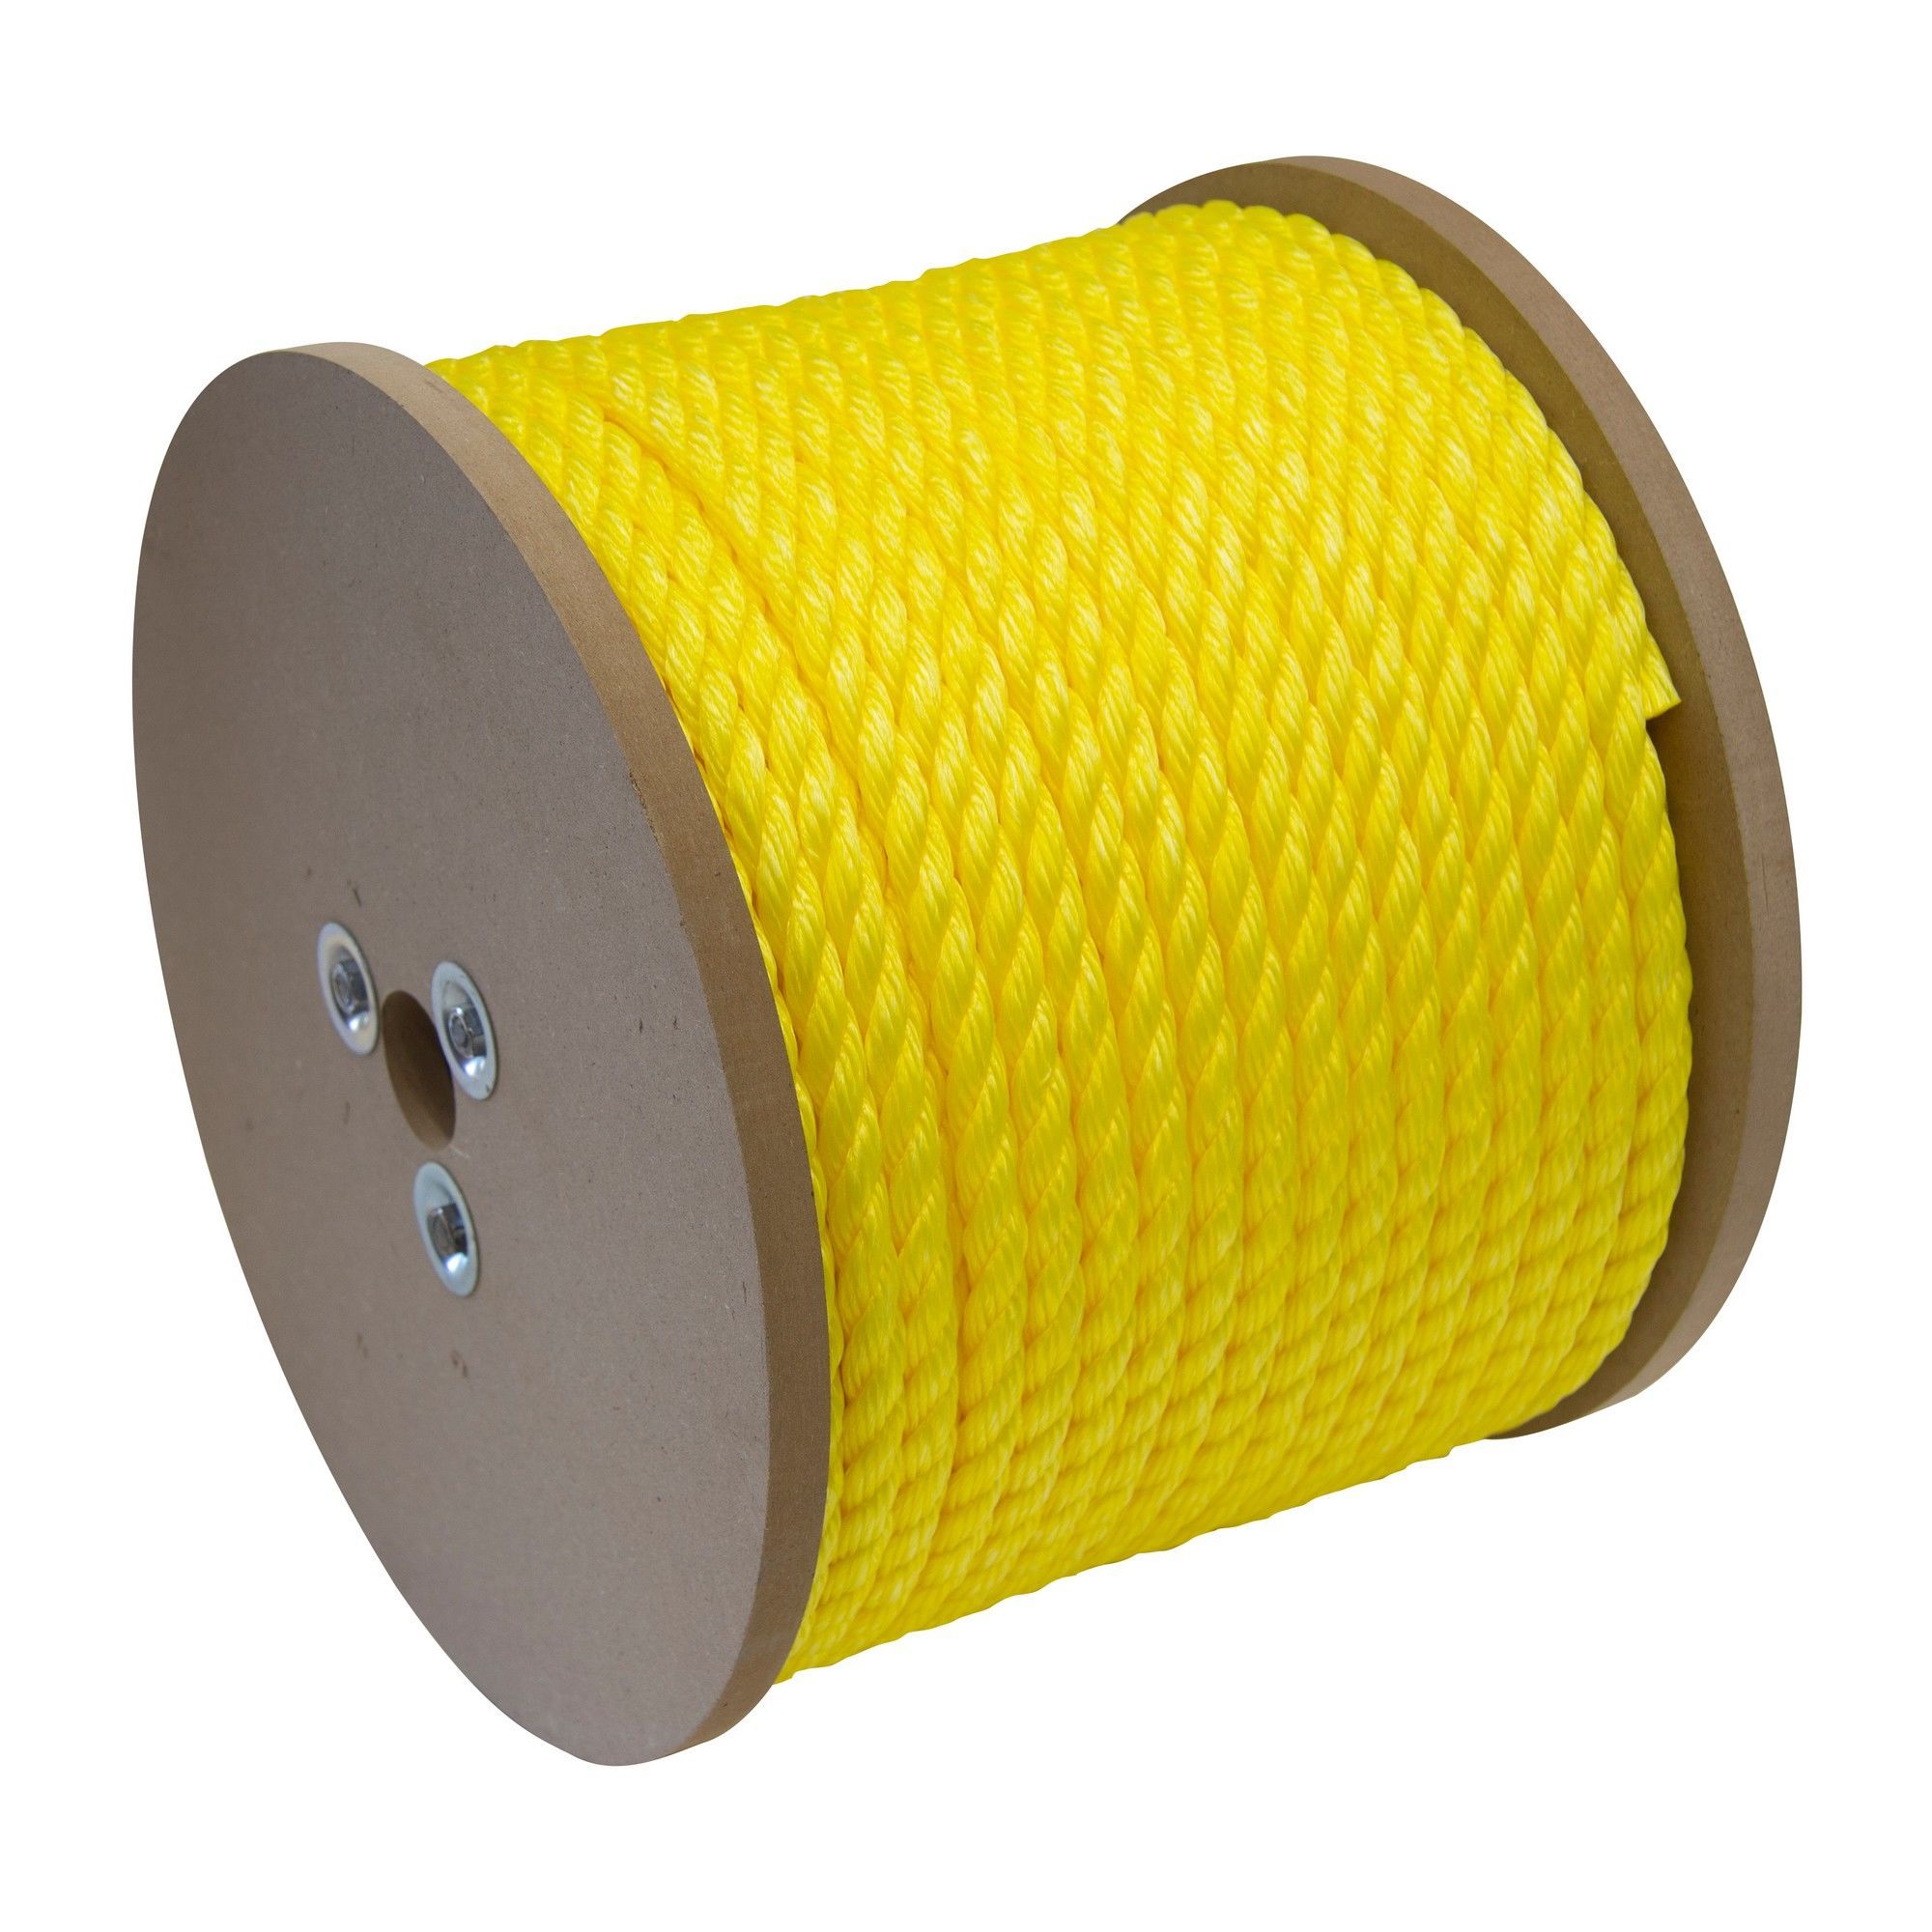 Twisted Polypropylene Rope - Yellow - 1/2 x 300' from KINGCORD